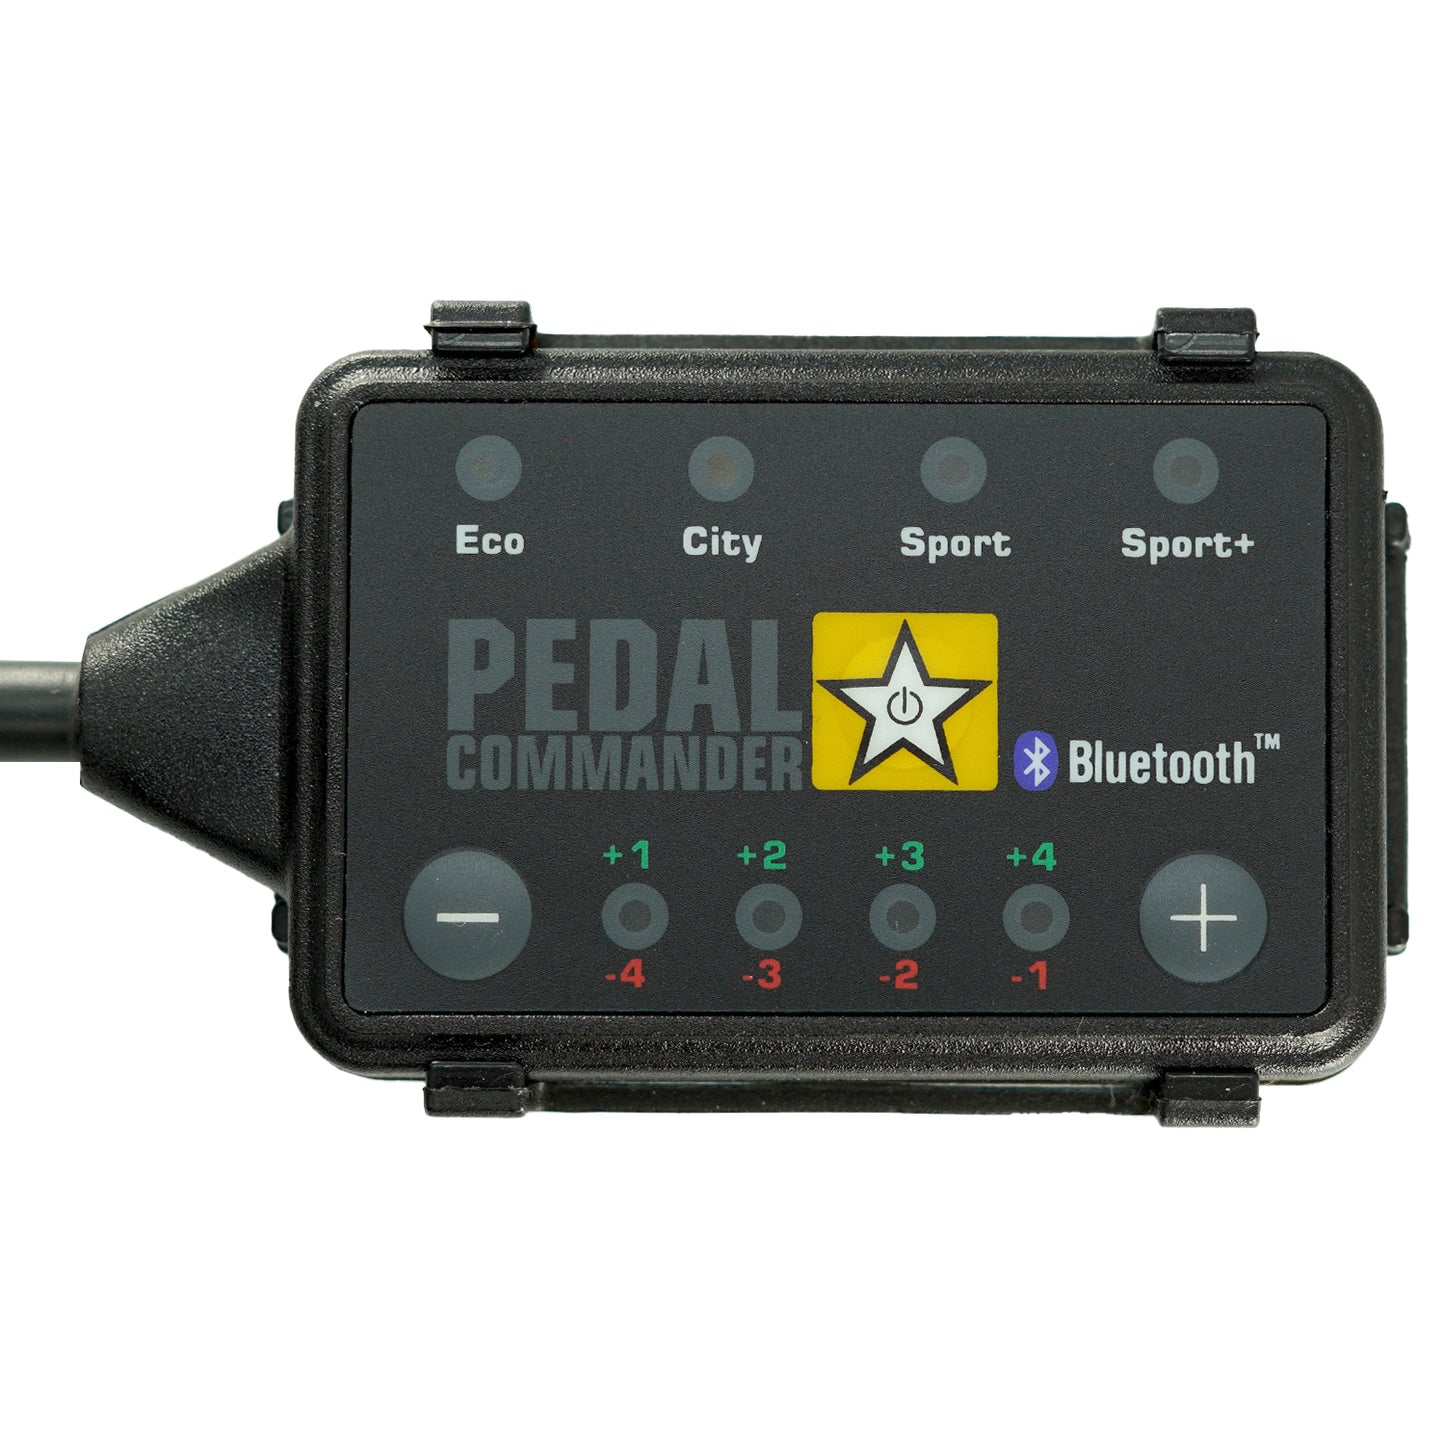 Pedal Commander For Buick LaCrosse (2005-2009) 64-BCK-LCR-01